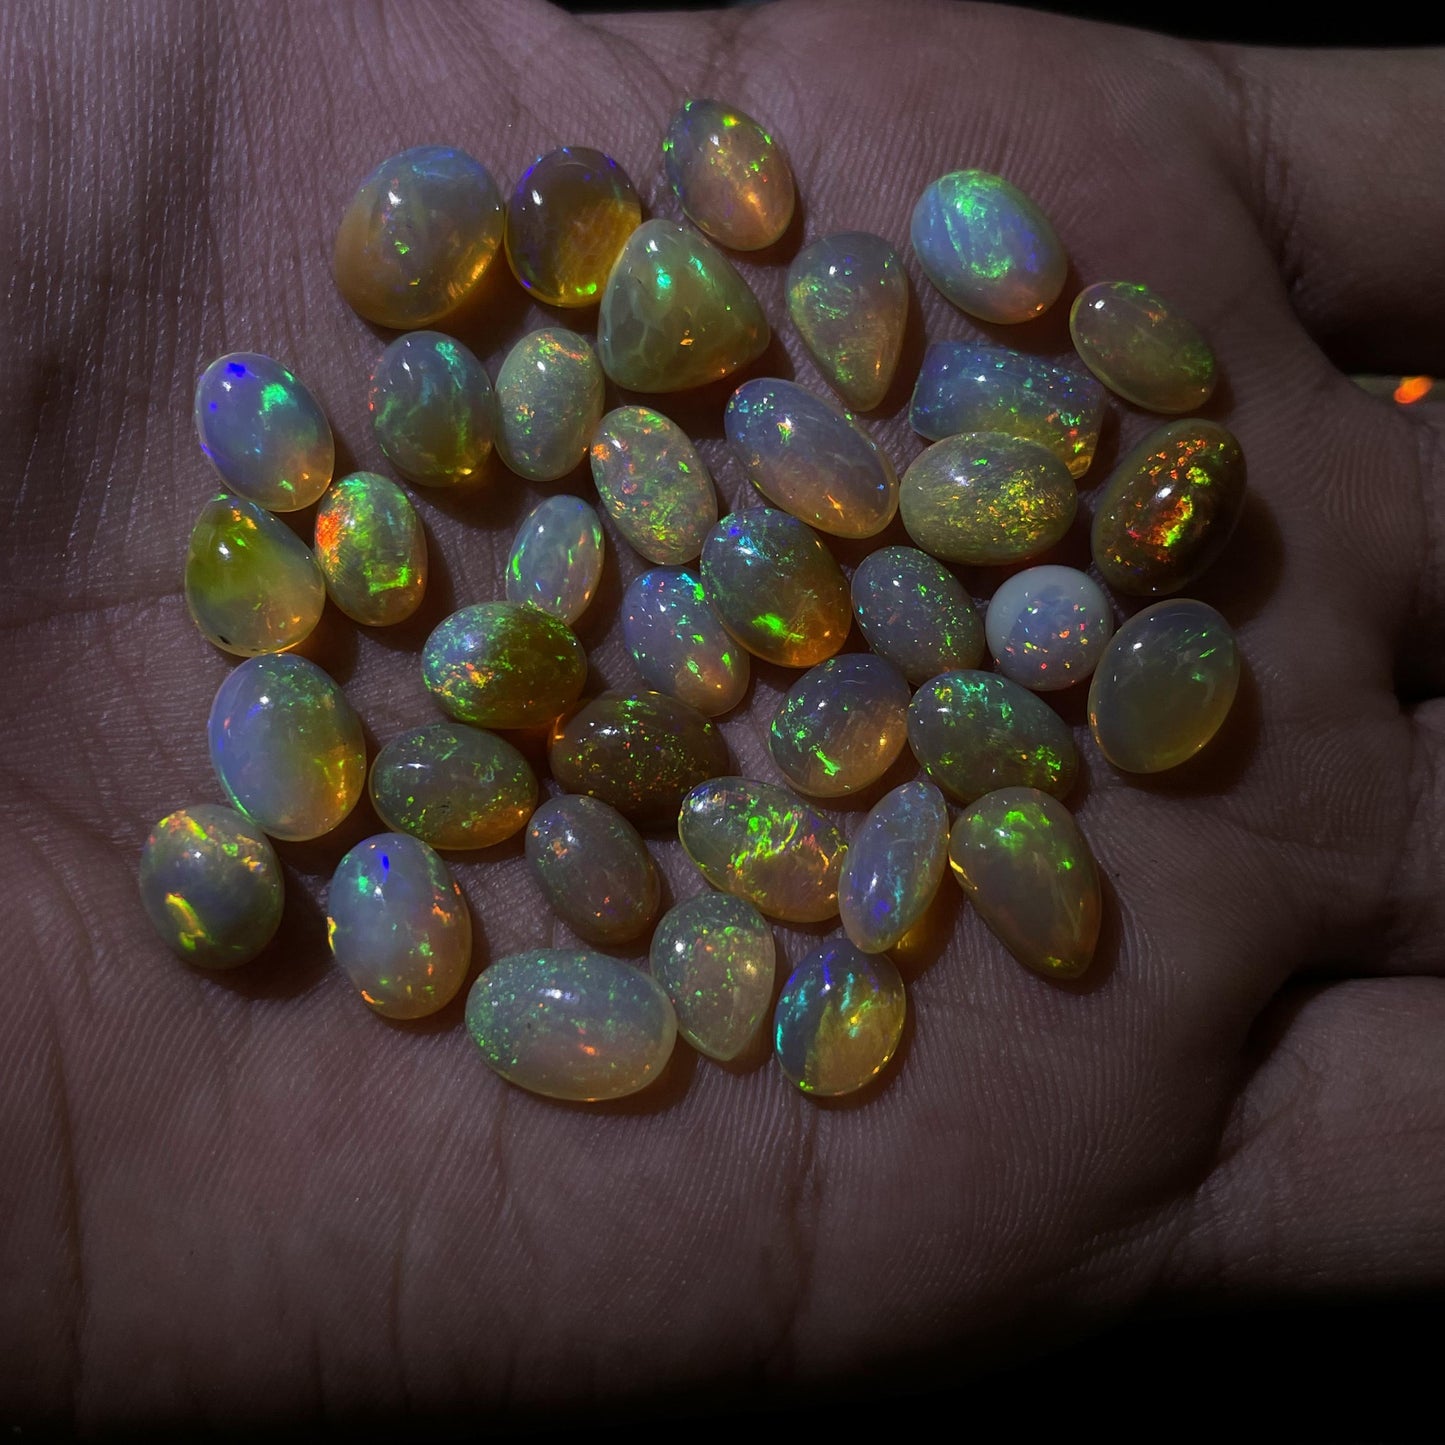 Exquisite Natural Ethiopian Opal Cabochon: Sparkling Beauty in 1.2 cts